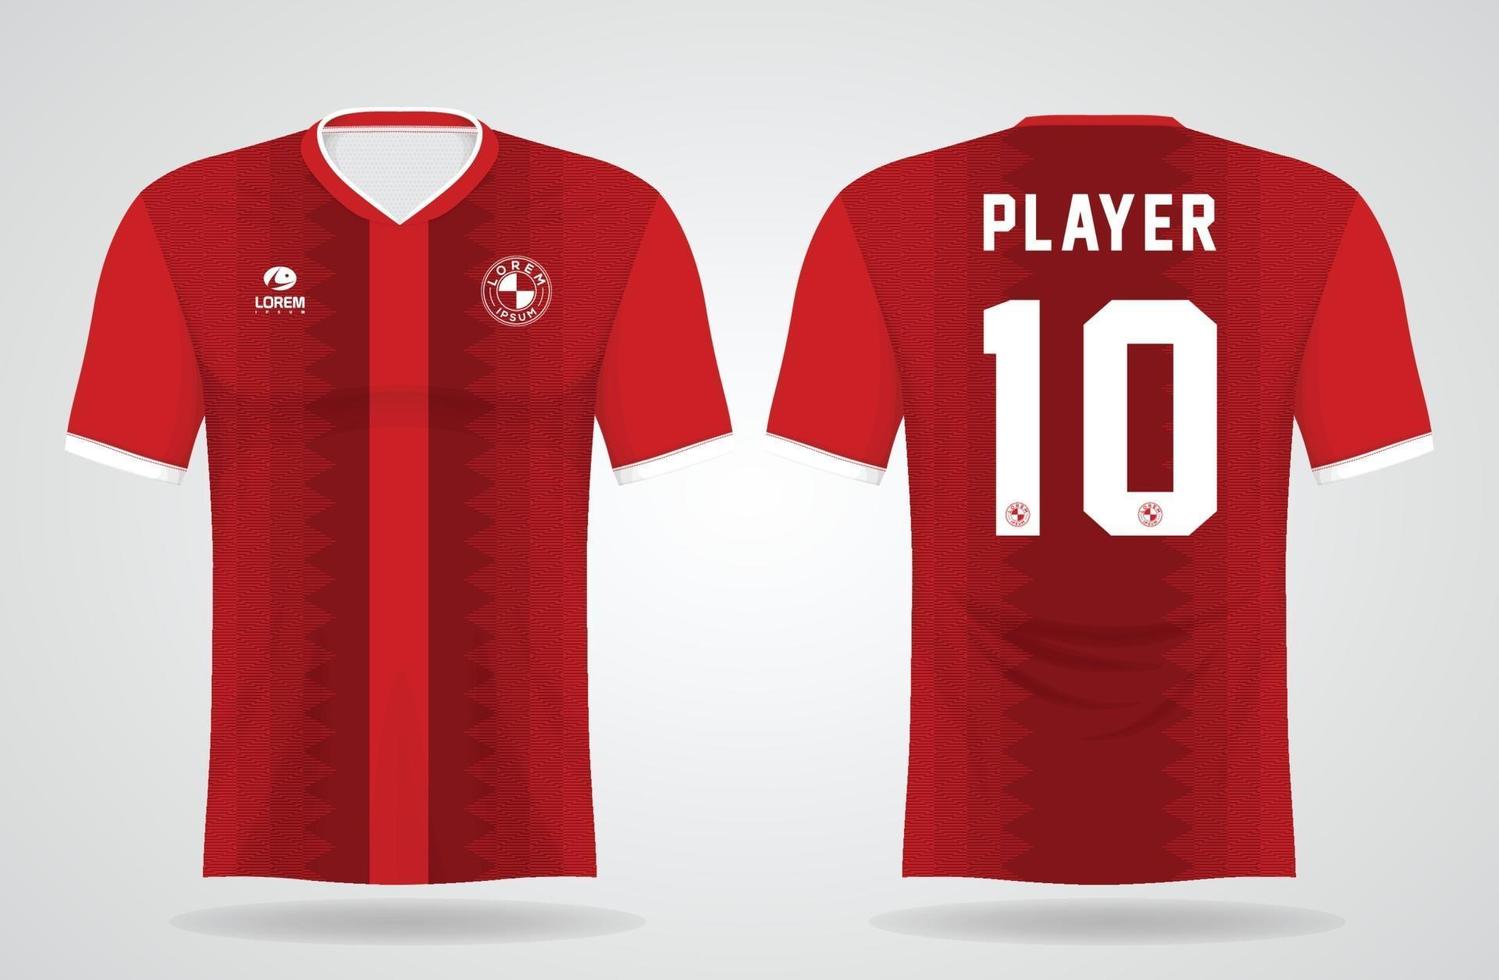 red sports jersey template for team uniforms and Soccer t shirt design vector